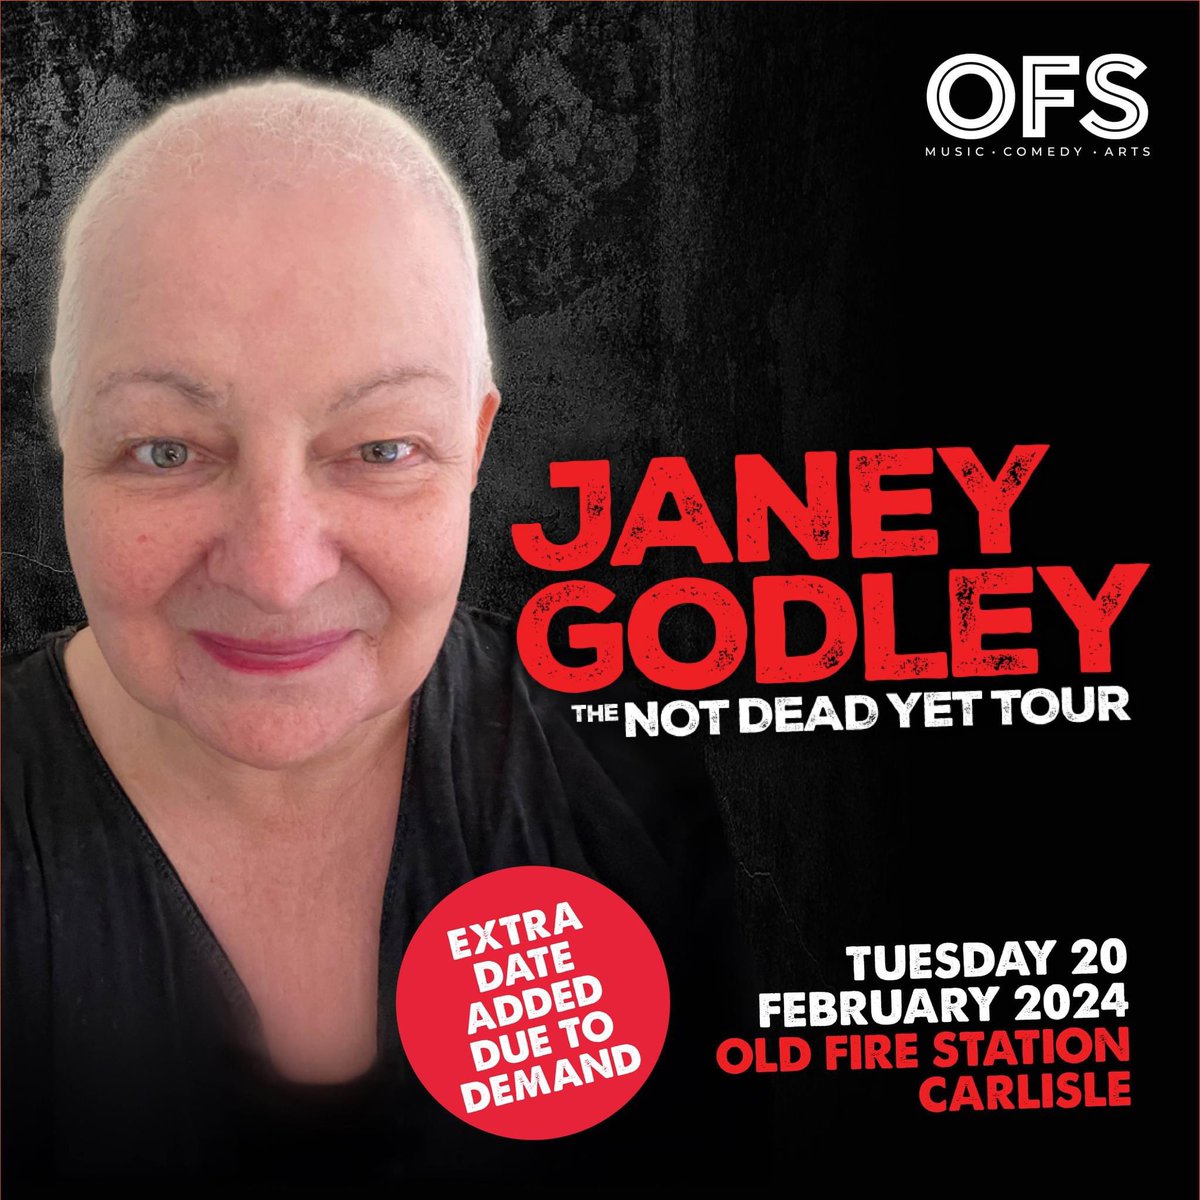 Second date added ofscarlisle.co.uk/event-janey-go…